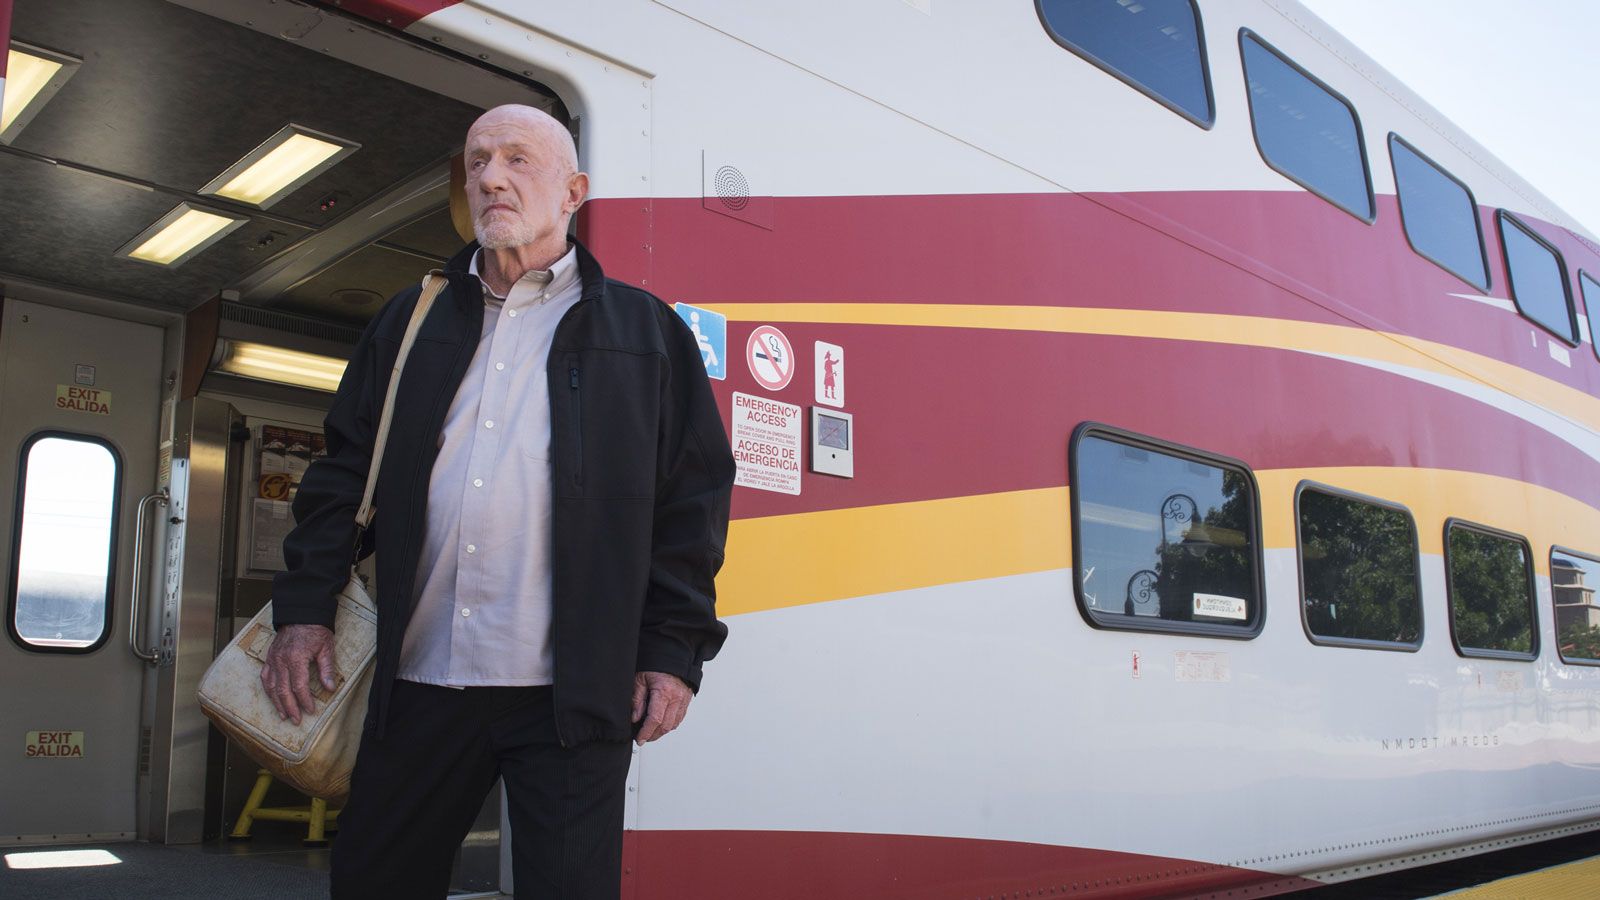 Better Call Saul reveals the tortured origin of Mike Ehrmantraut